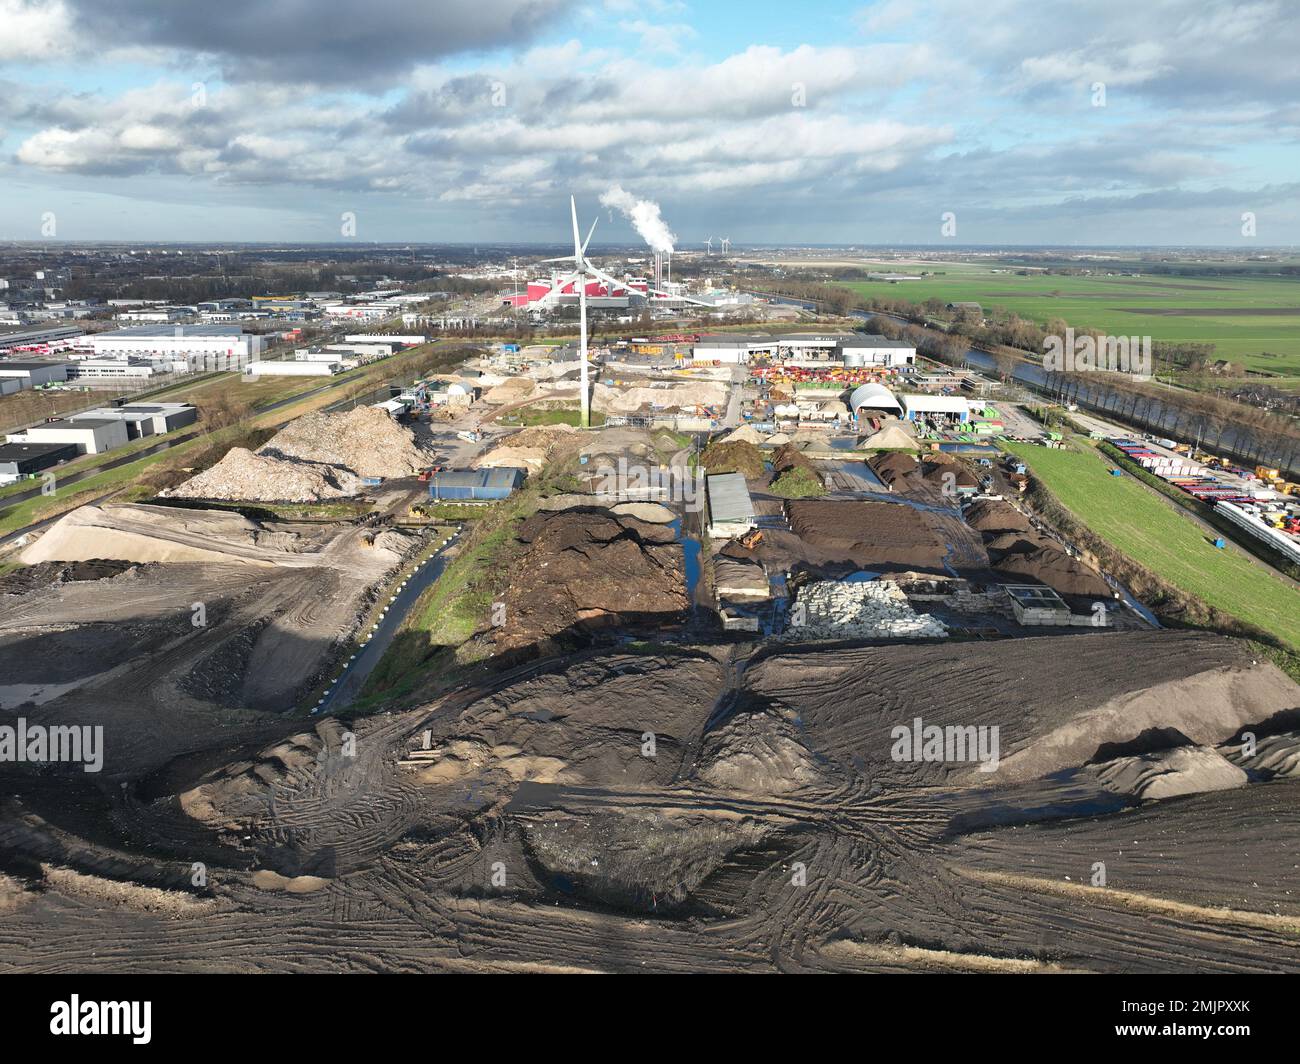 Landfill dumping ground, heaps of waste in compund facility in Alkmaar, The Netherlands. Containers for collection and segmentation. Aerial. Stock Photo